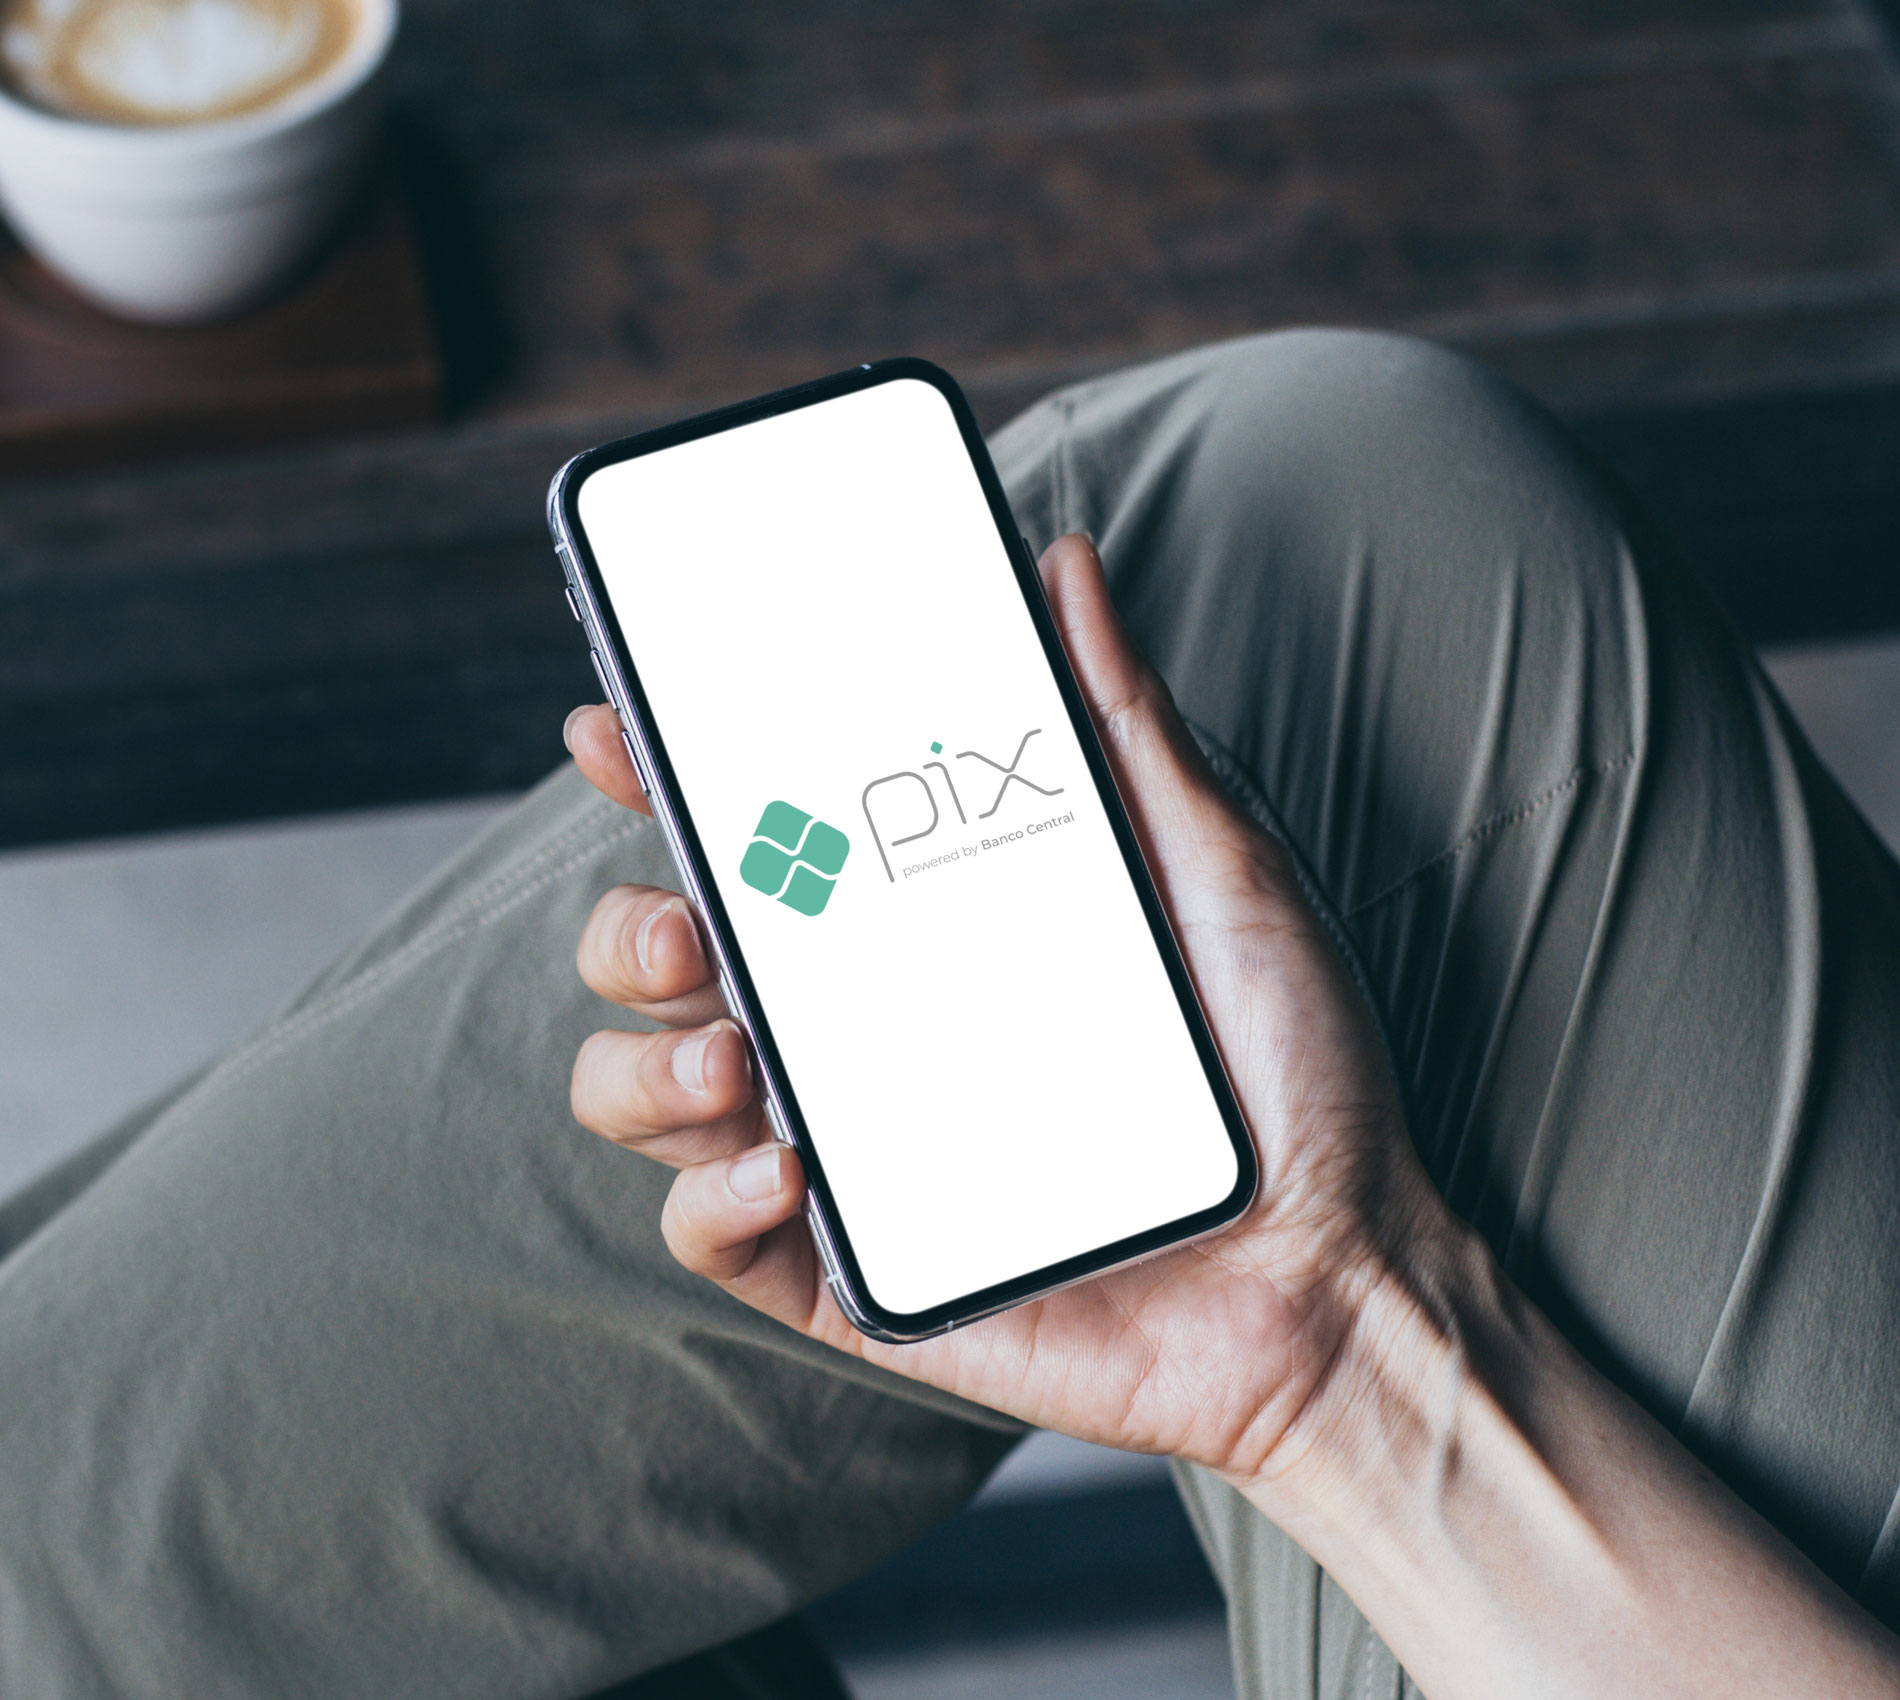 Central Bank of Brazil announces Pix Cobrança and Pix API, the instant payment’s new functionalities